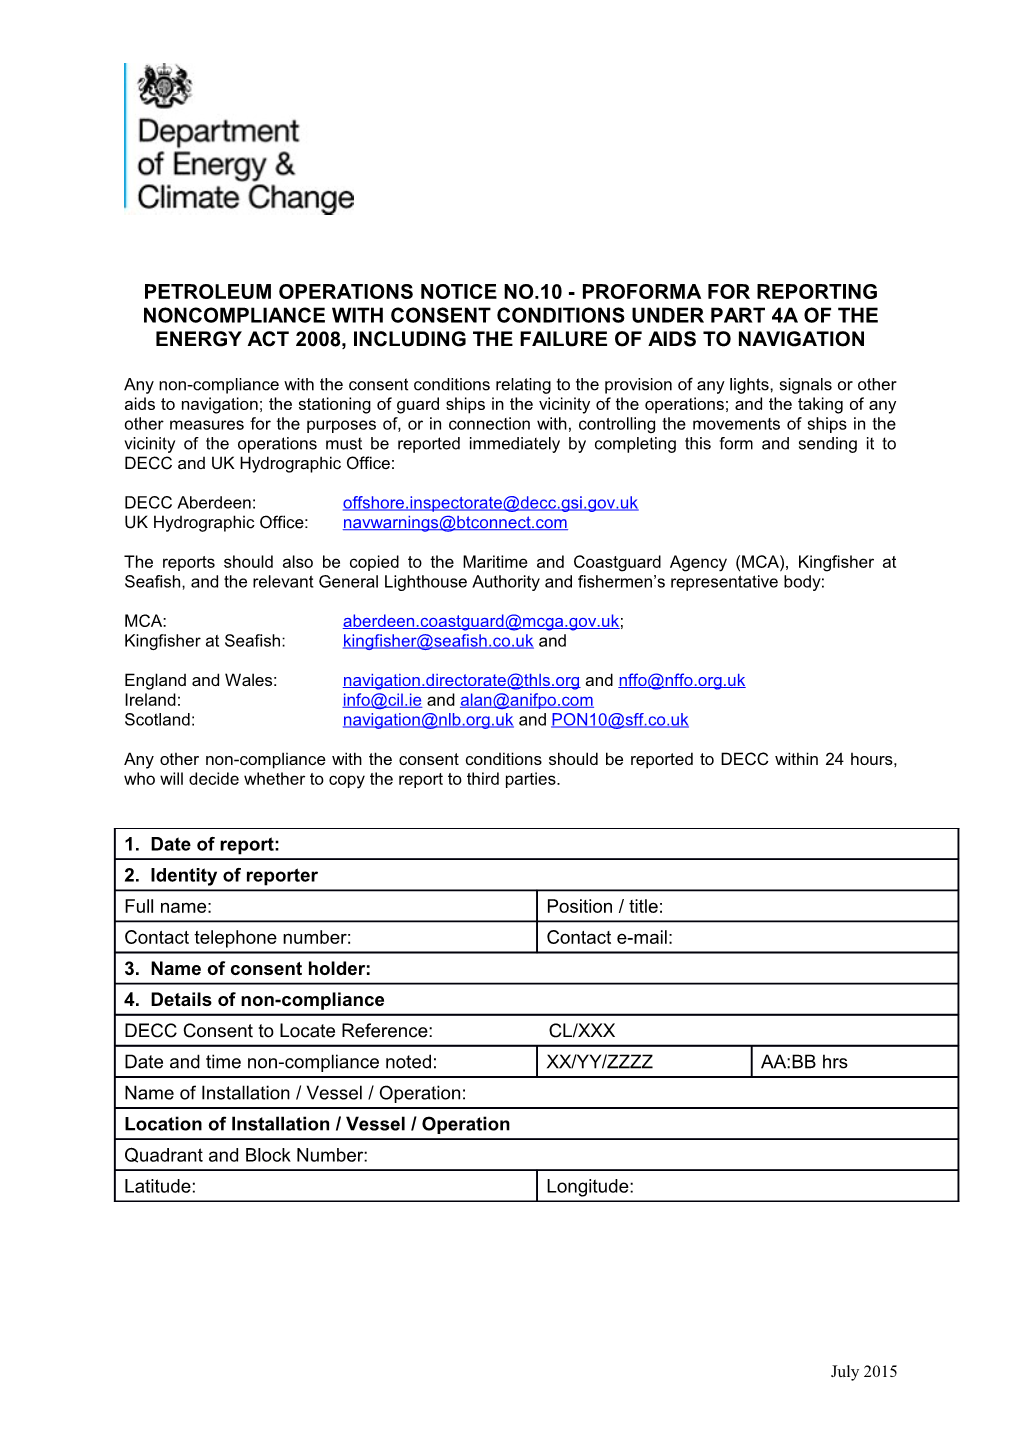 Petroleum Operations Notice No.10 - Proforma for Reporting Noncompliance with Consent